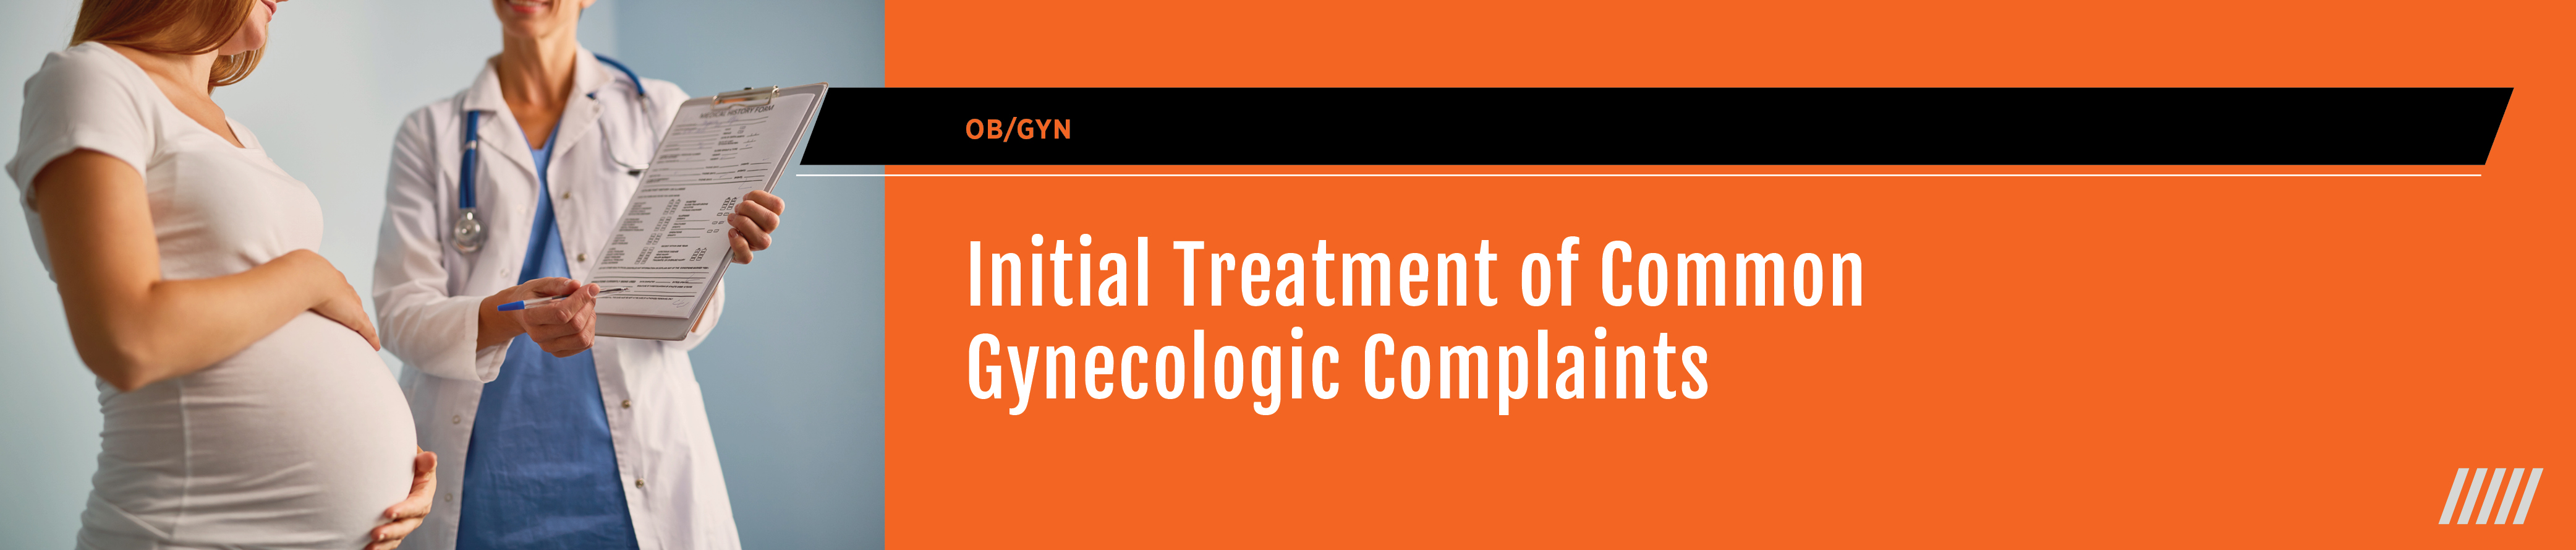 Initial Treatment of Common Gynecologic Complaints Banner